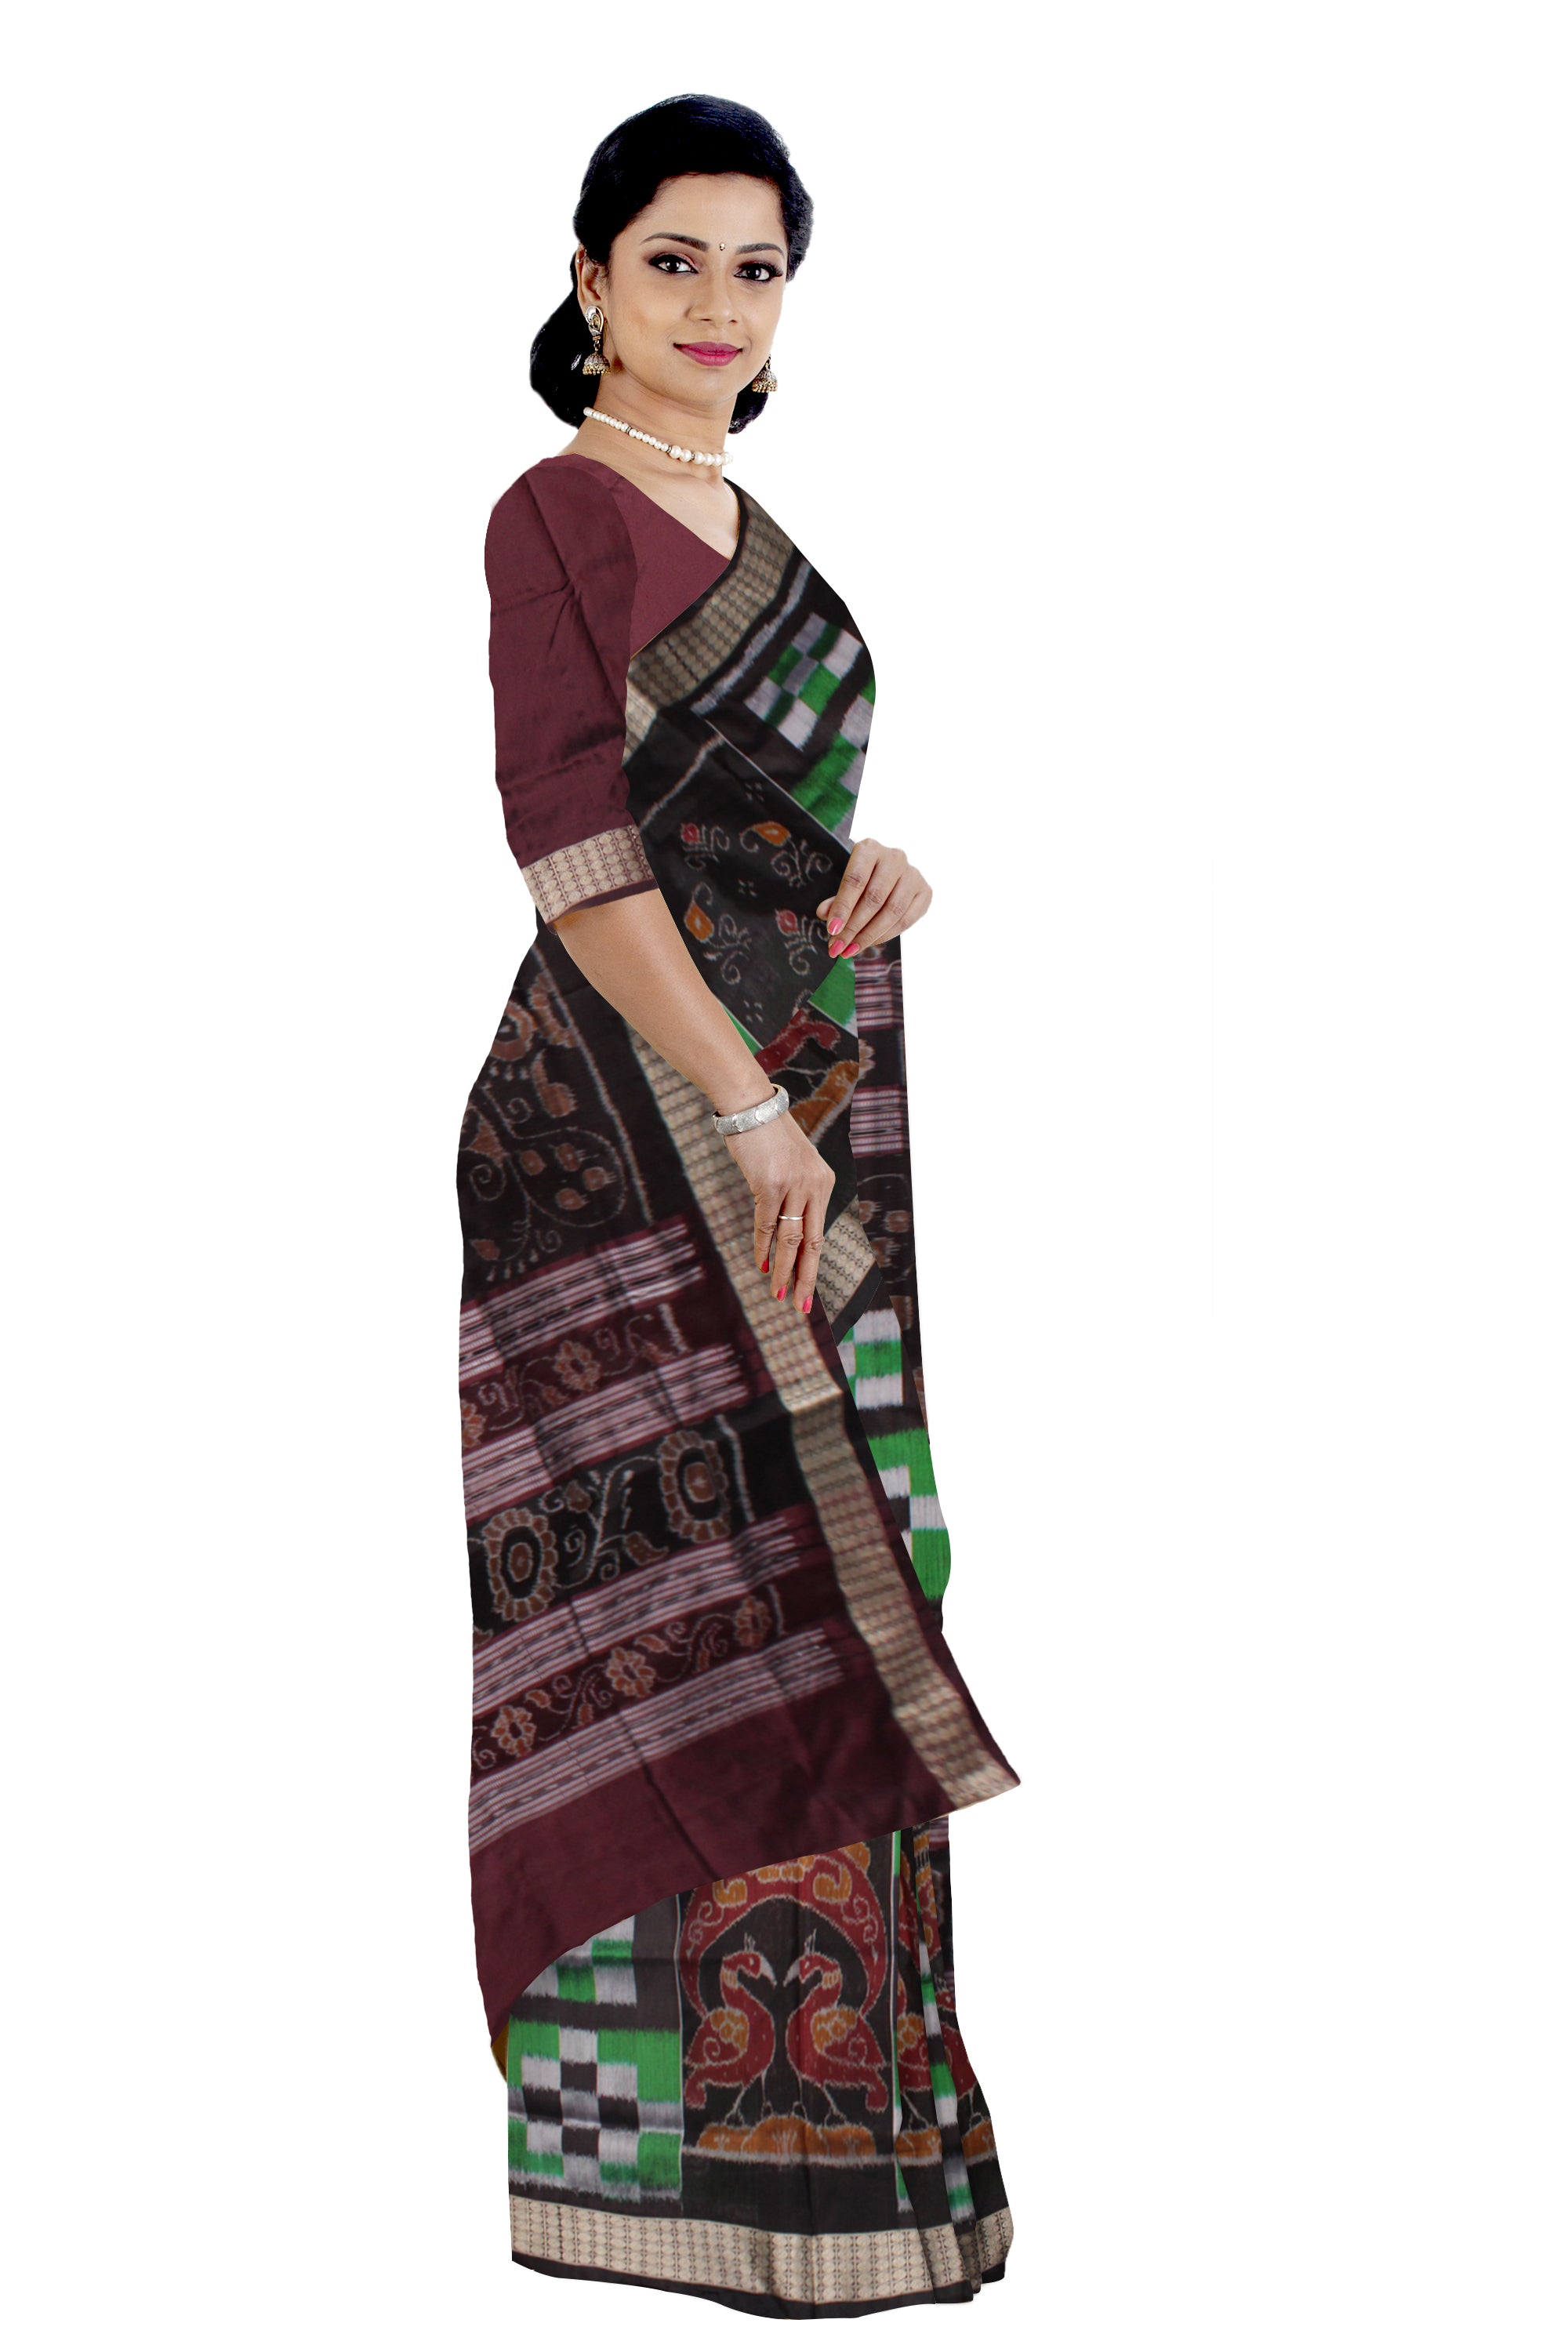 TRADITIONAL PASAPALI WITH PEACOCK PRINT BOMKEI PATA SAREE IS GREEN,WHITE AND COFFEE COLOR BASE,AVAILABLE WITH MATCHING BLOUSE PIECE. - Koshali Arts & Crafts Enterprise